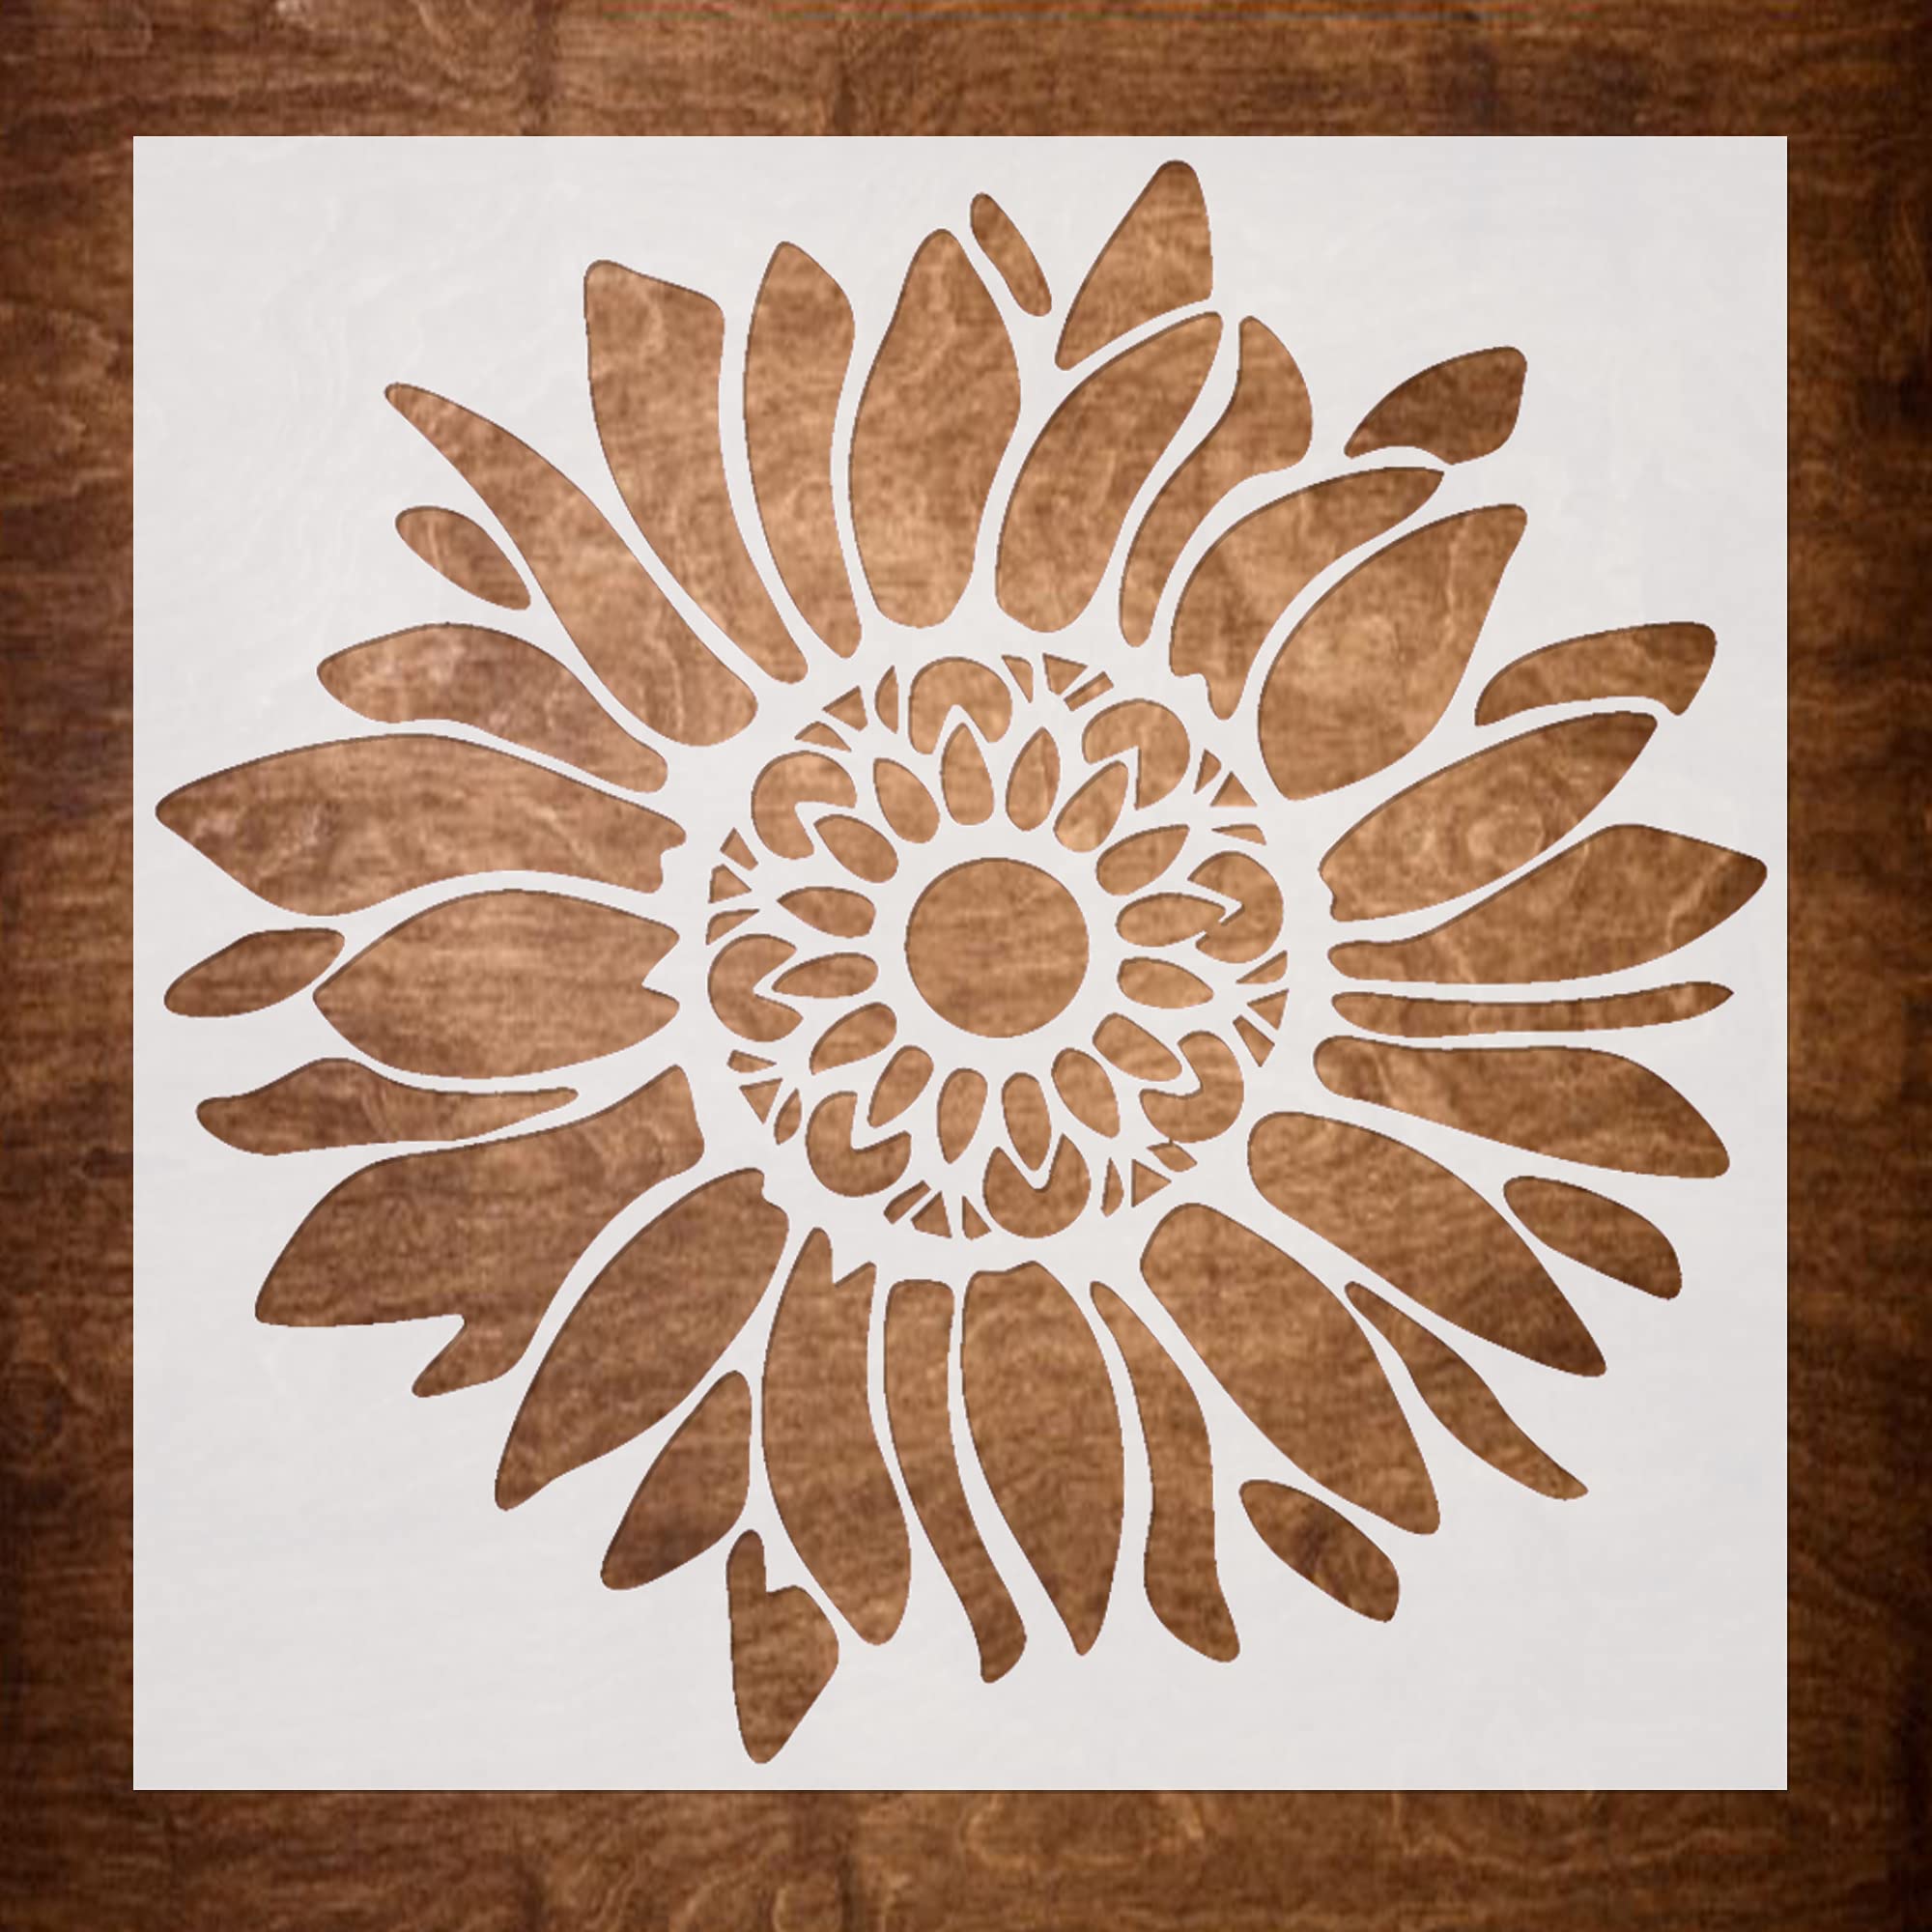 DLY LIFESTYLE Boho Sunflower Stencil for Painting on Wood, Canvas, Paper,  Fabric, Walls and Furniture - Sunflower Stencil - 7x7 Inches - Reusable DIY  Art and Craft Stencils - Flower Stencil Boho Sunflower 7x7